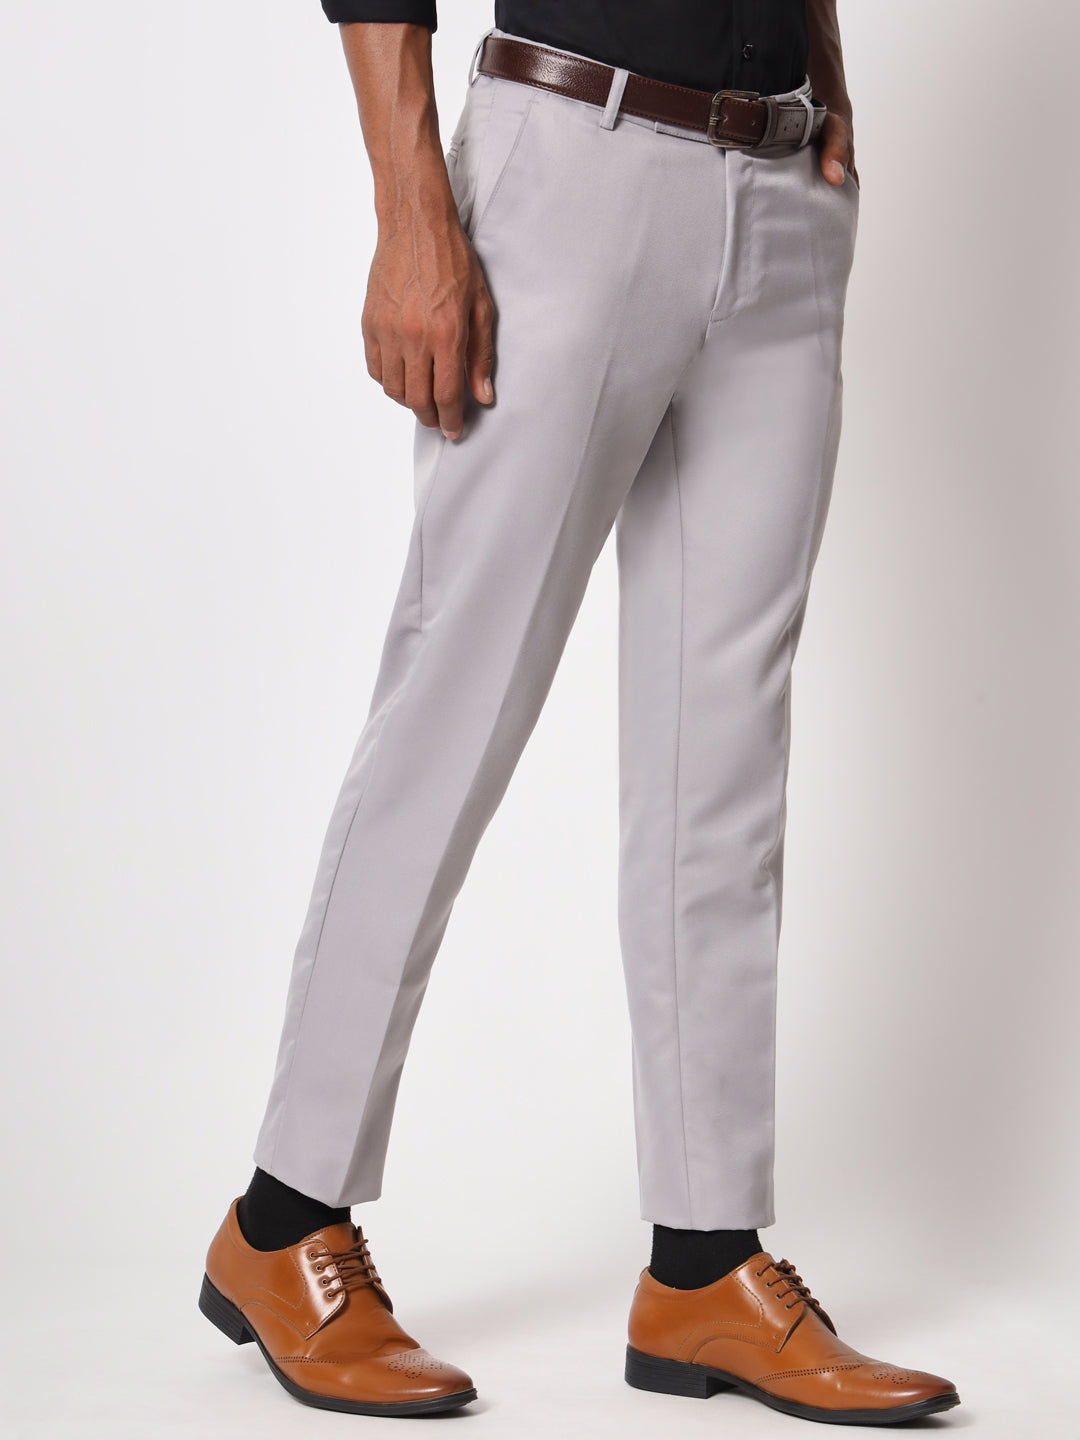 Decible Polyster Blend FormalTrousers For Man |formal pants light grey |light  grey pant | trousers for men | office pant |